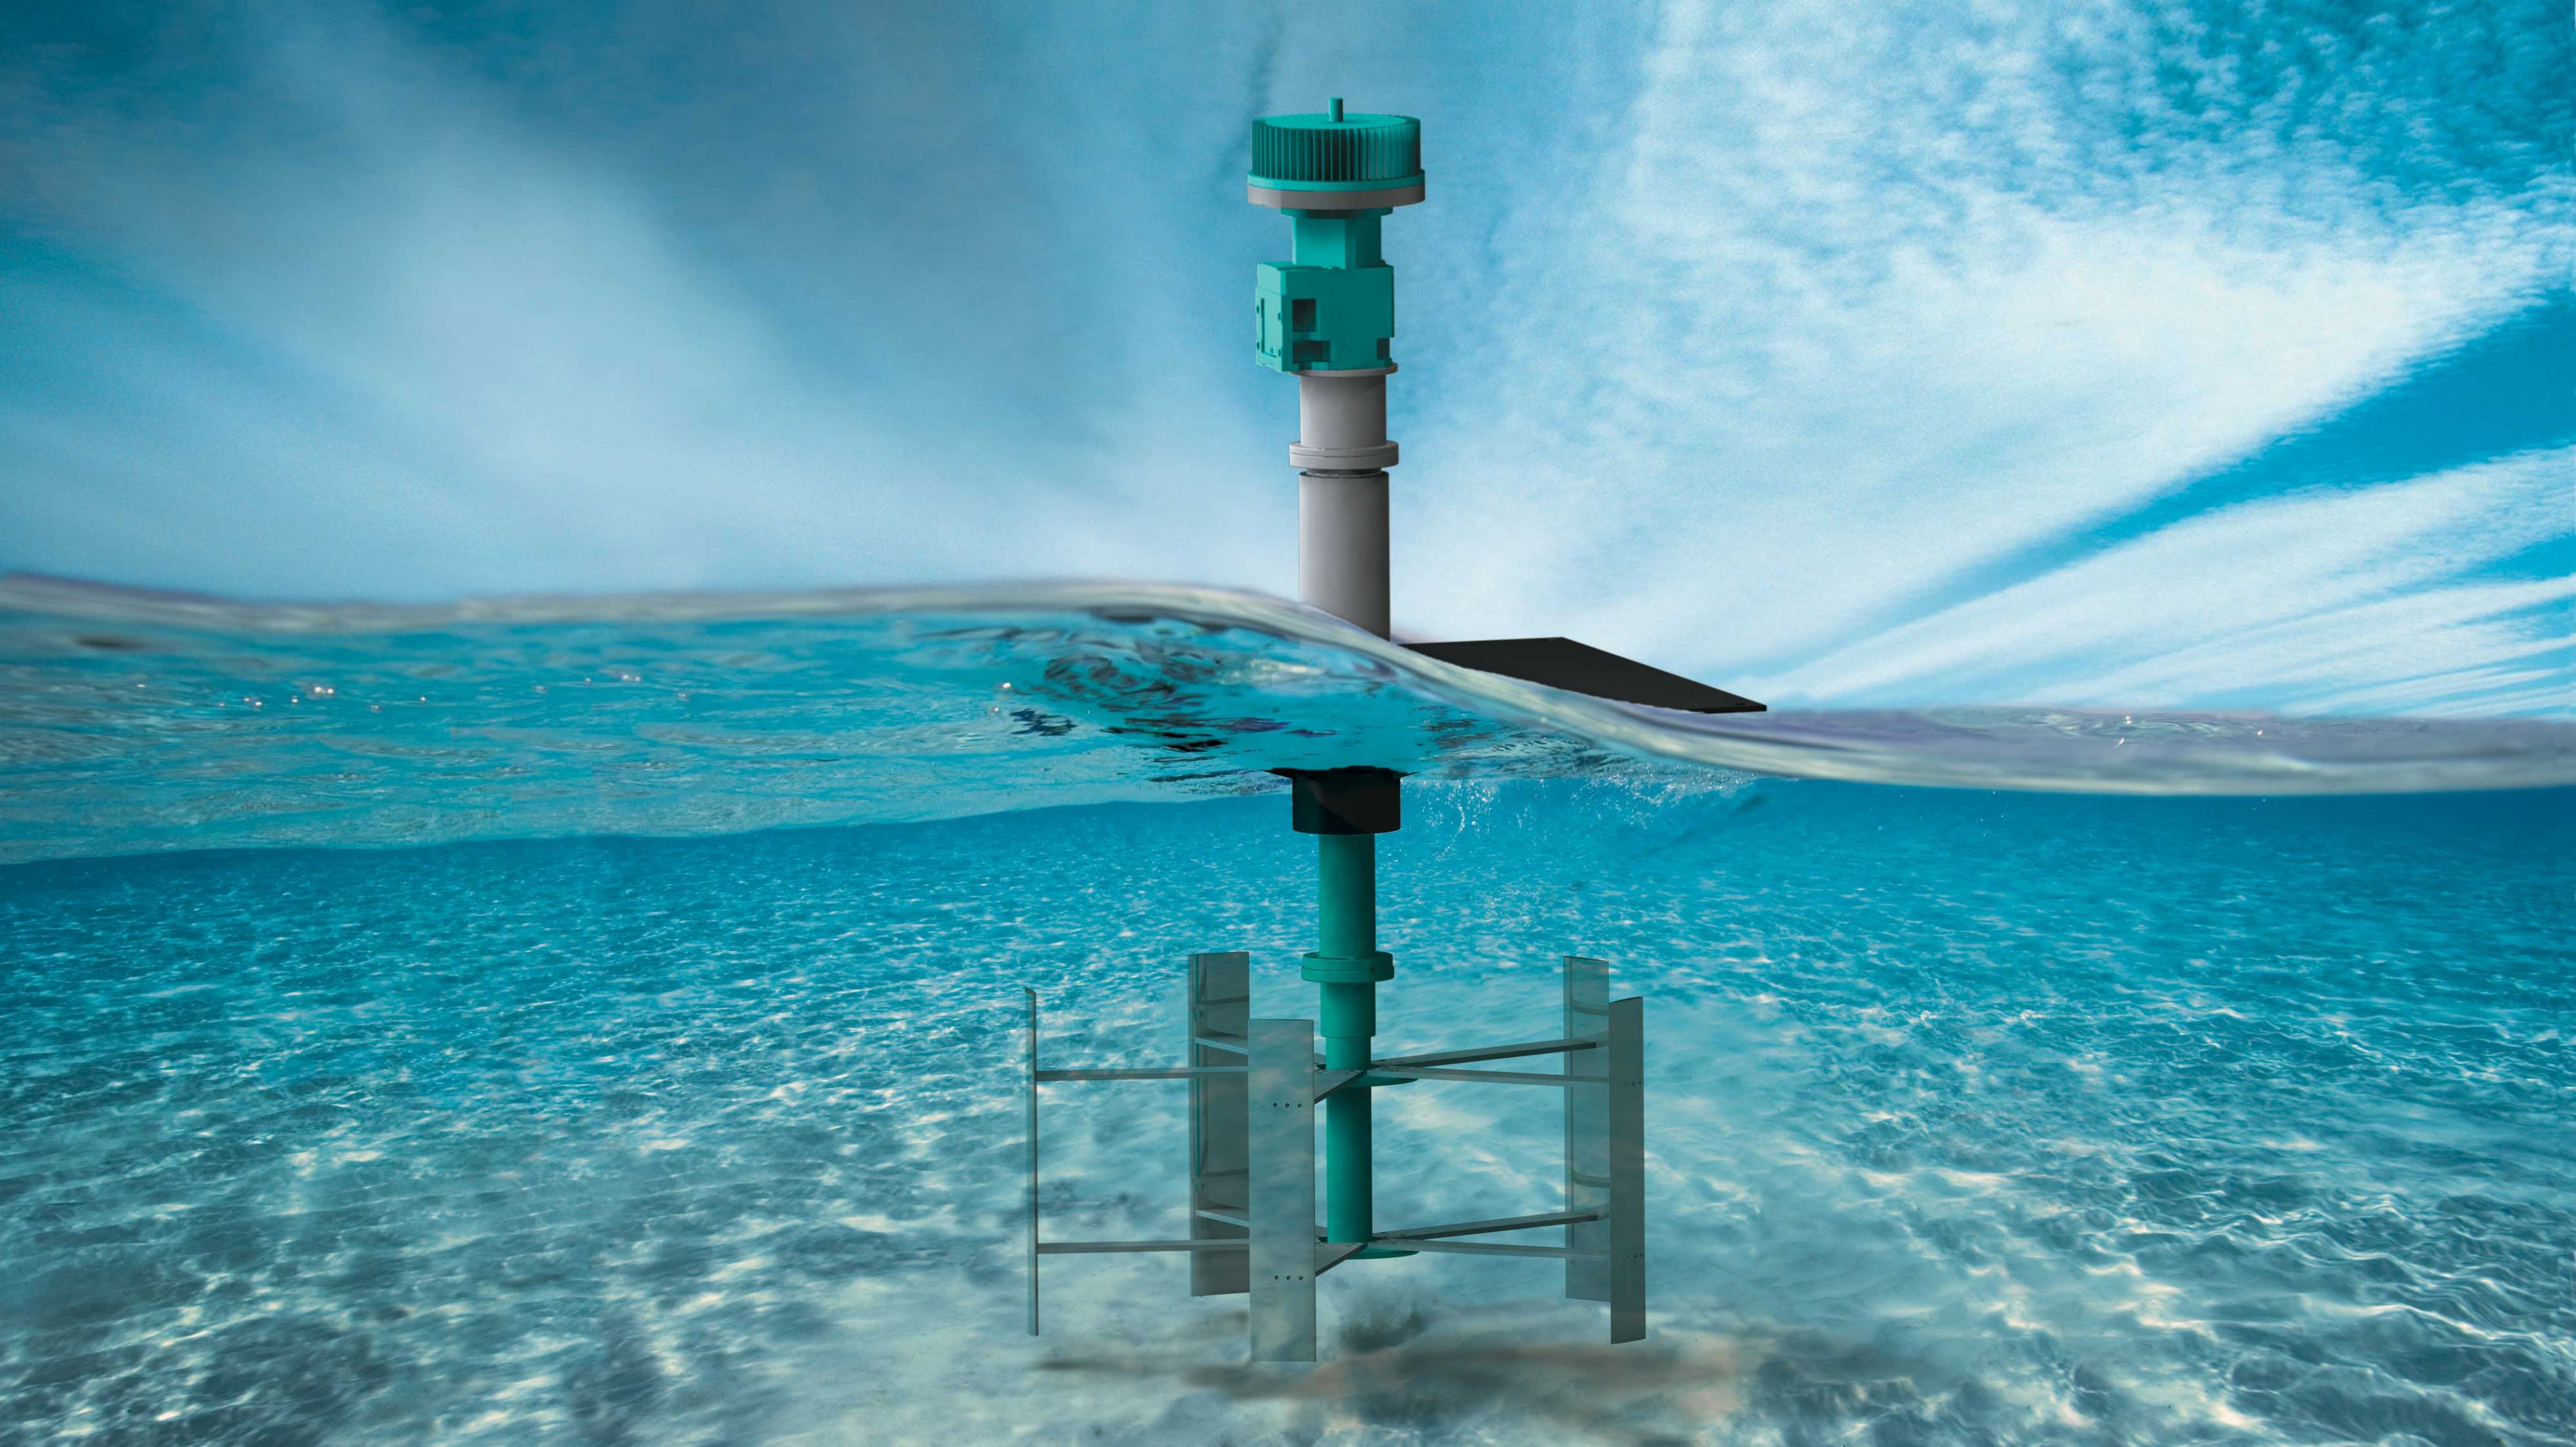 Computer rendering of a river hydrokinetic turbine, with a view of the turbine from both above and under the water.